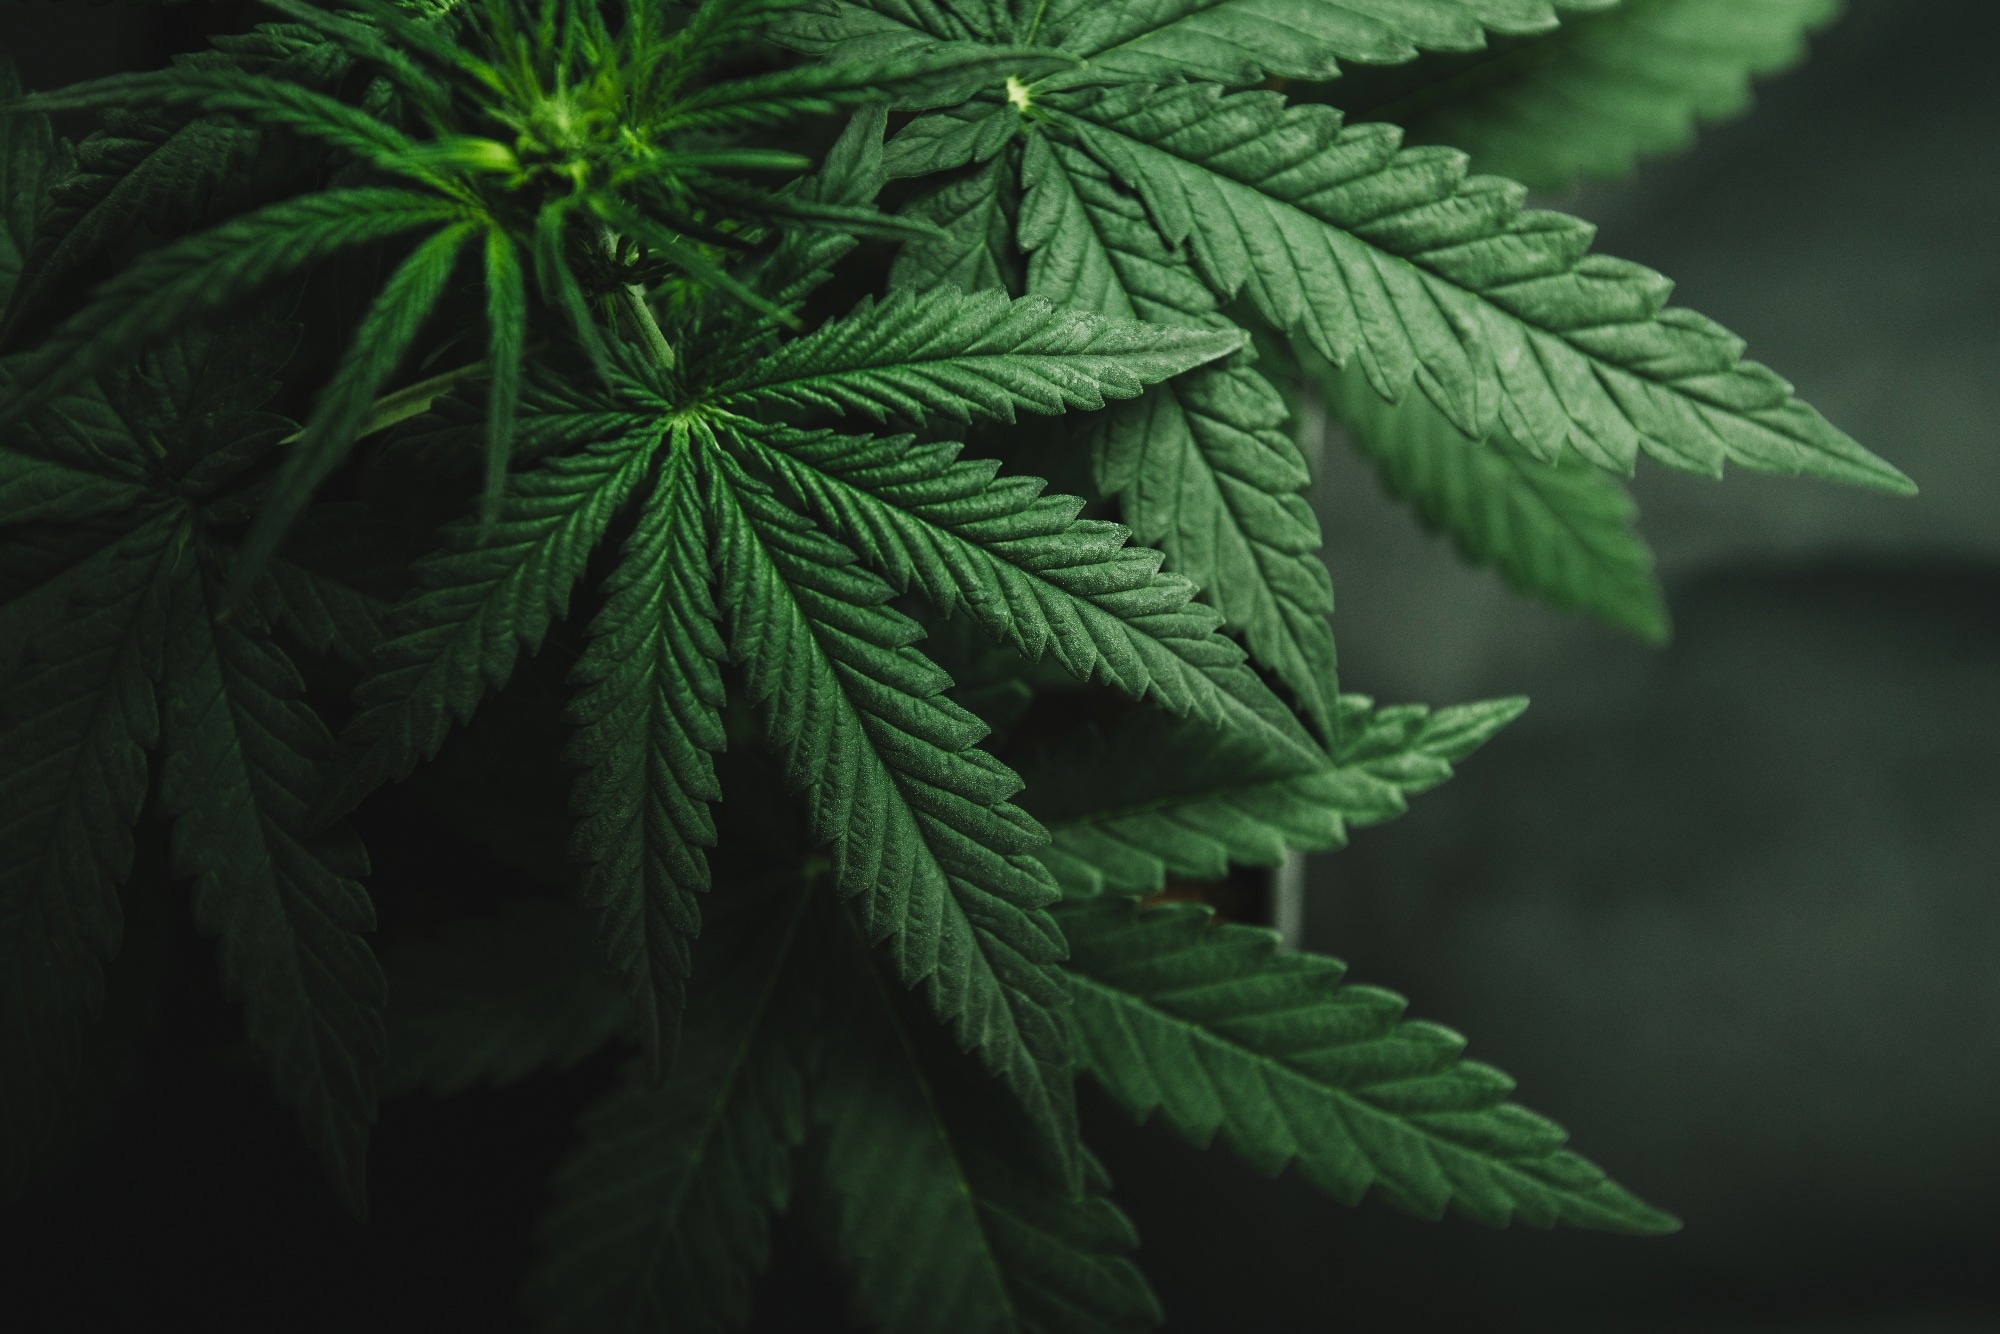 Study: High Potency Cannabis Use in Adolescence. Image Credit: Yarygin/Shutterstock